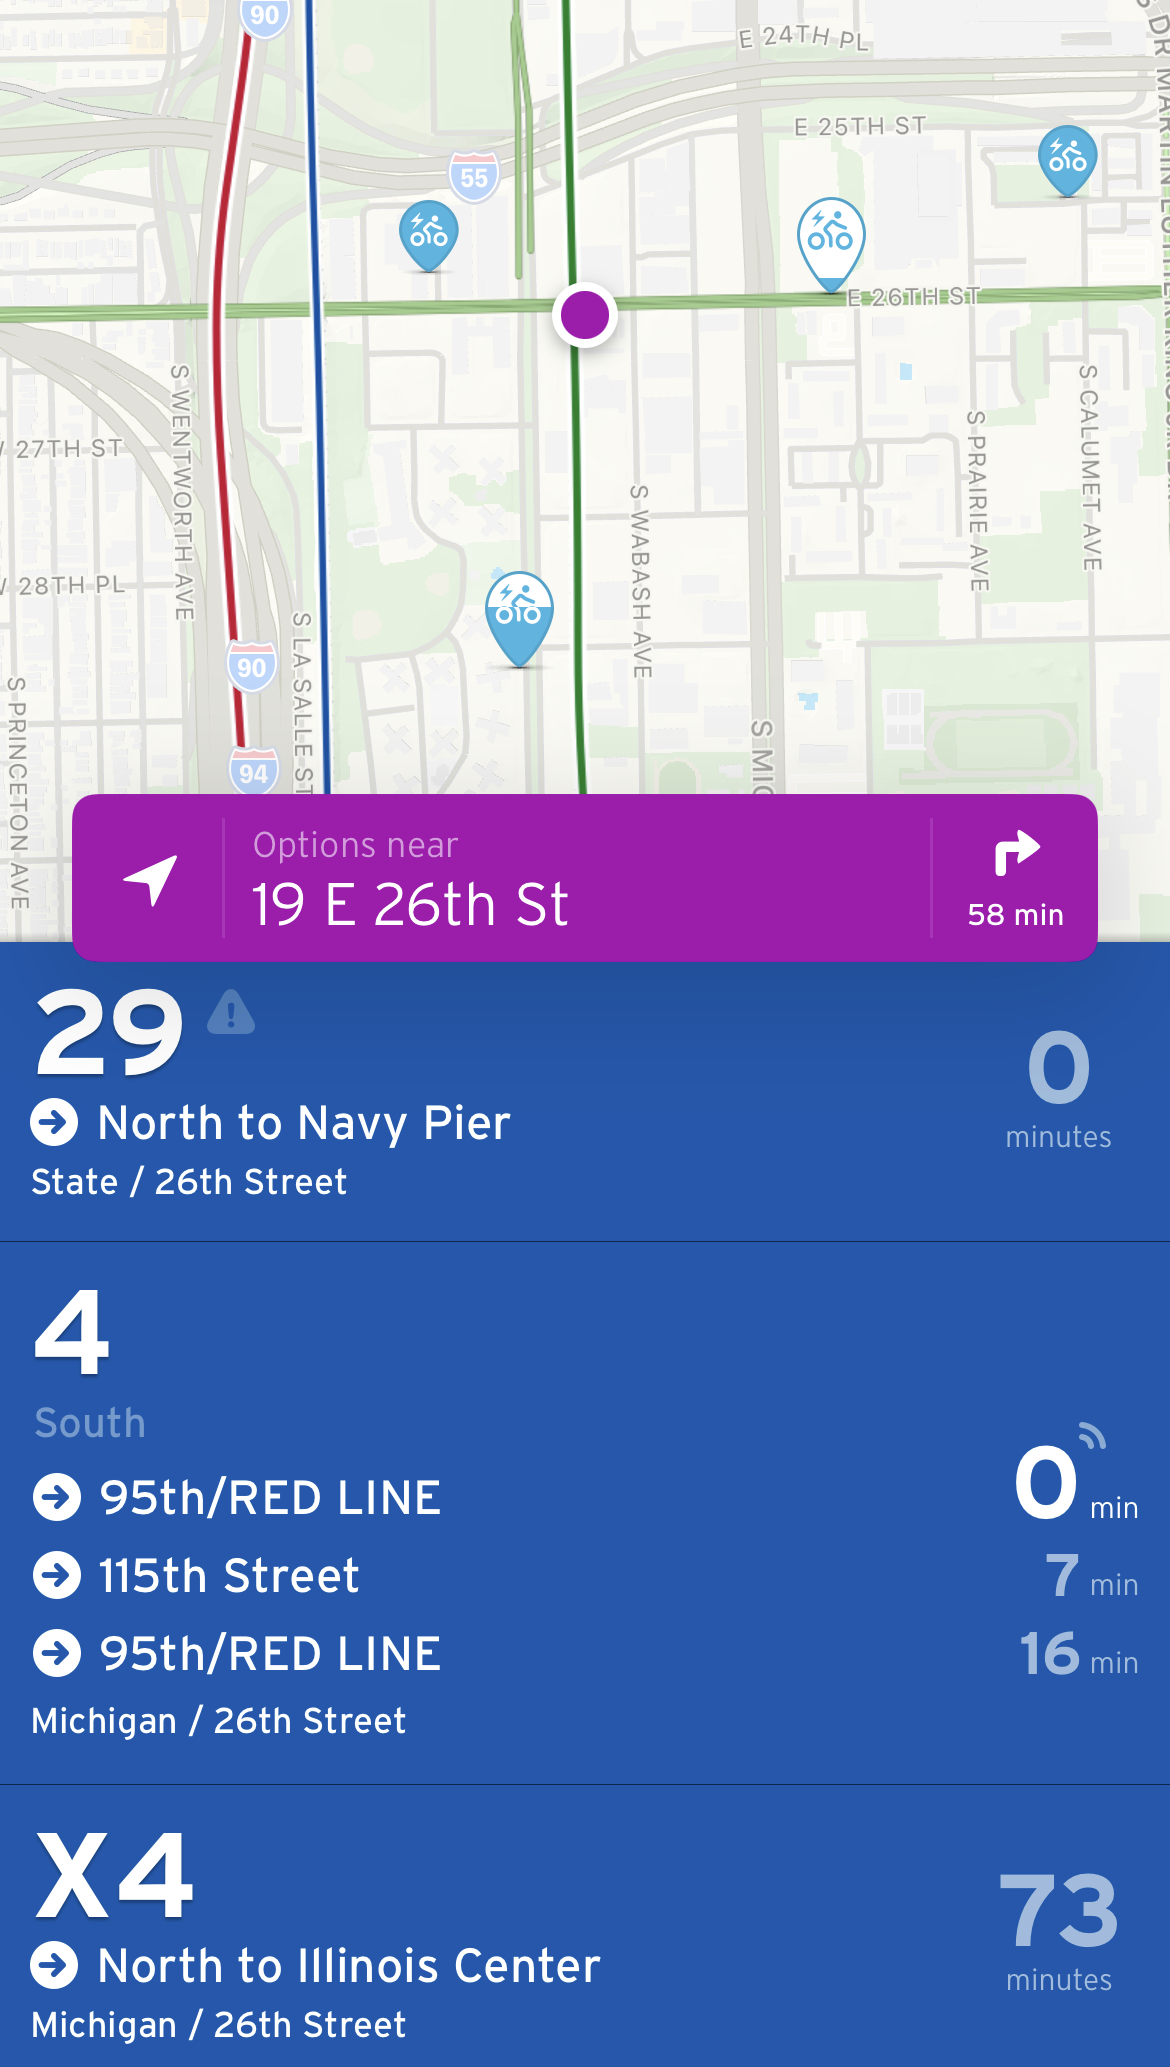 A Transit App screen in Chicago's South Side Bronzeville neighborhood.